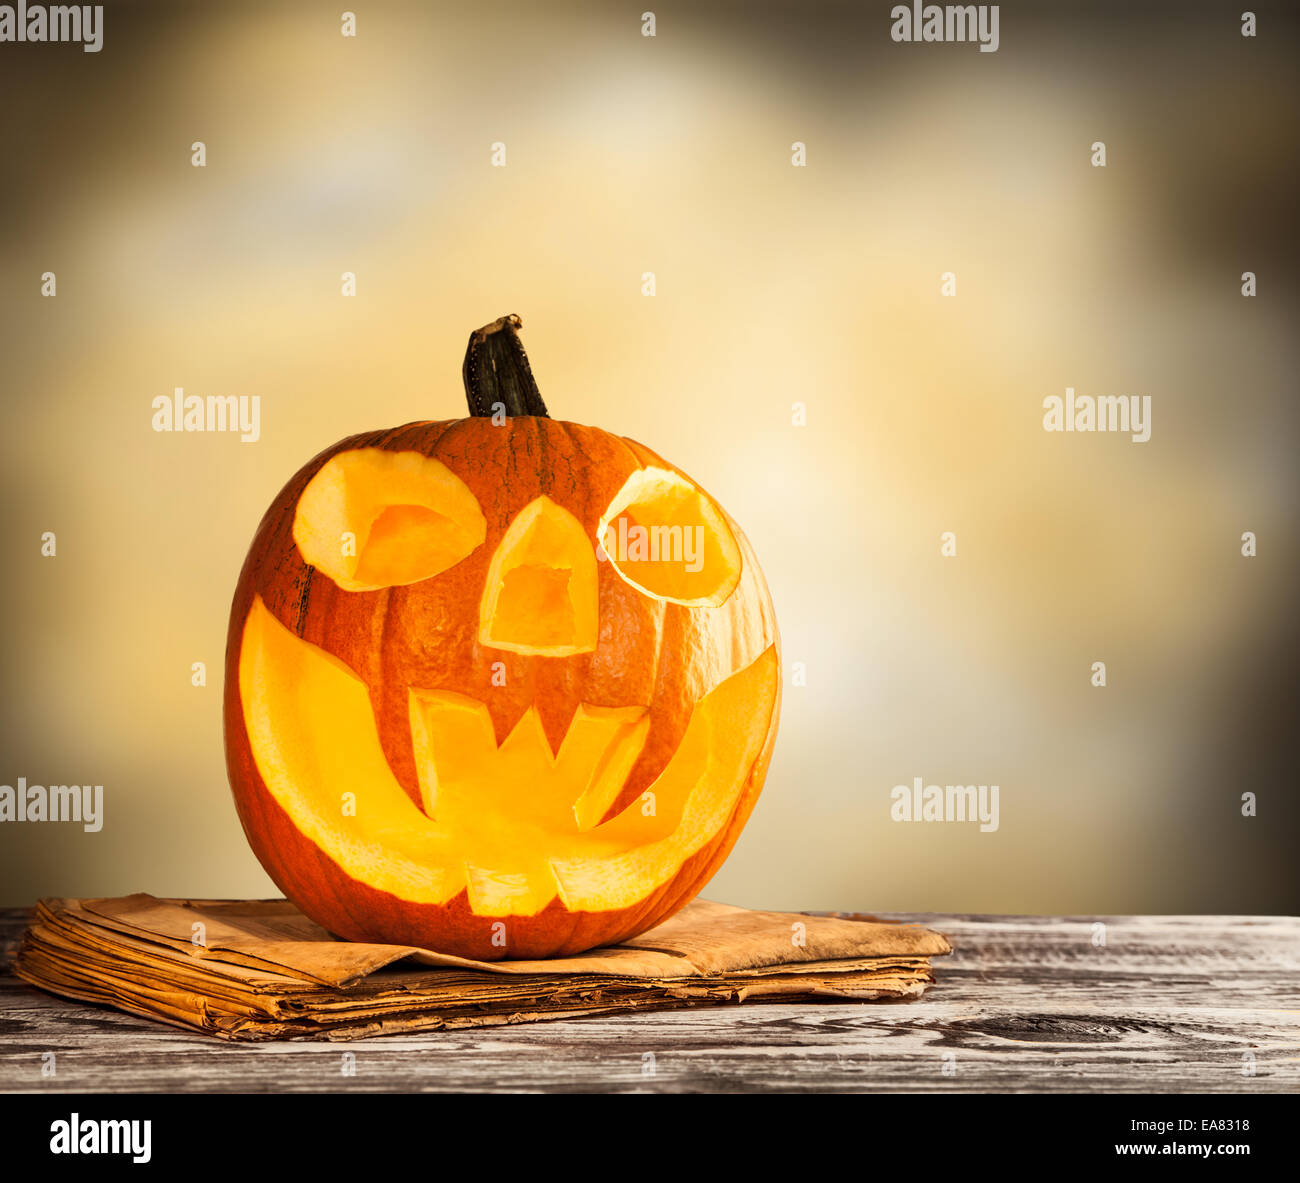 Evil halloween pumpkin on wood with free space for text Stock Photo